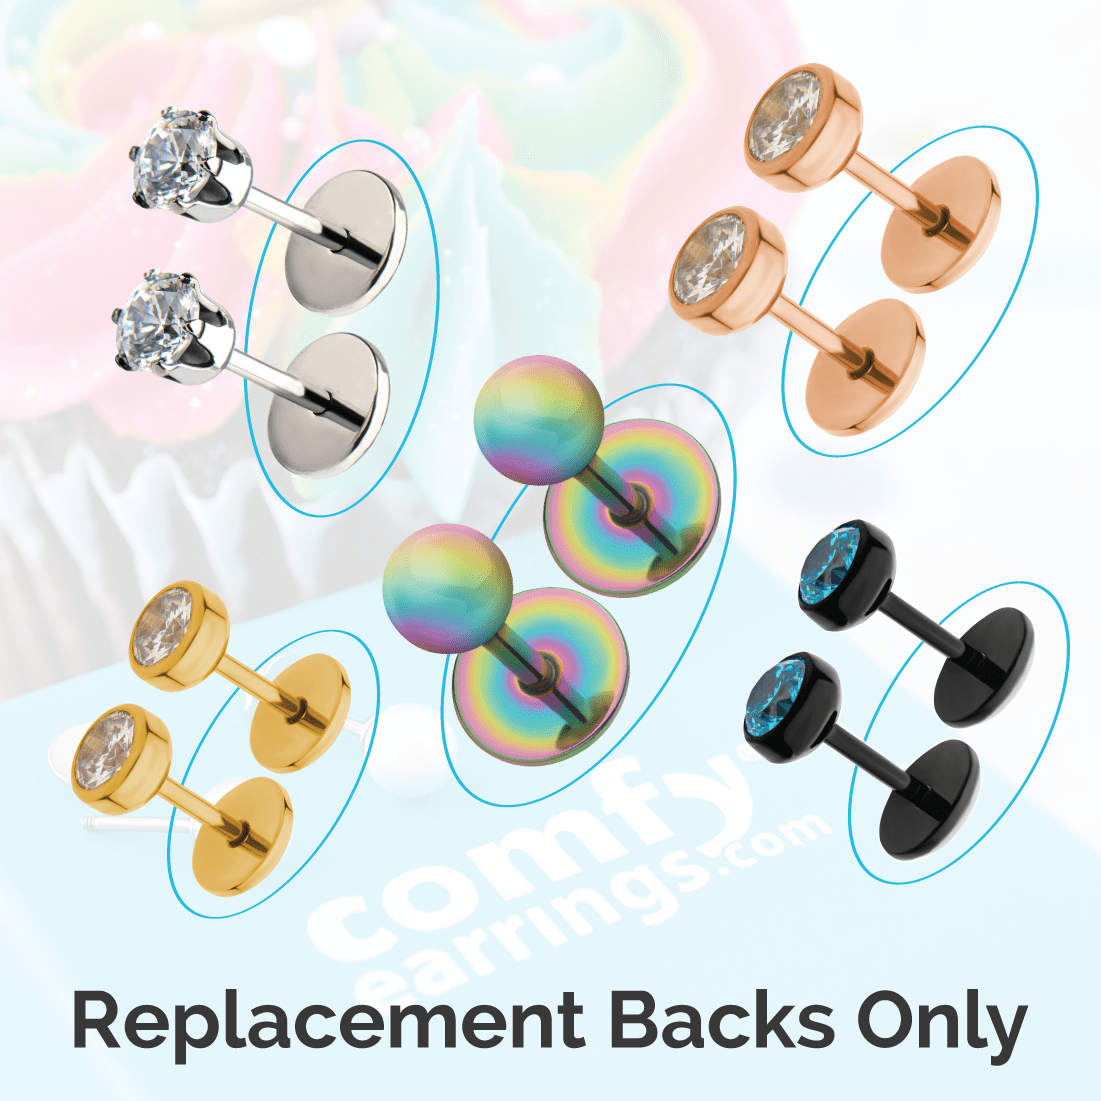 https://comfyearrings.com/wp-content/uploads/2015/03/ComfyEarrings-Replacement-Backs.png